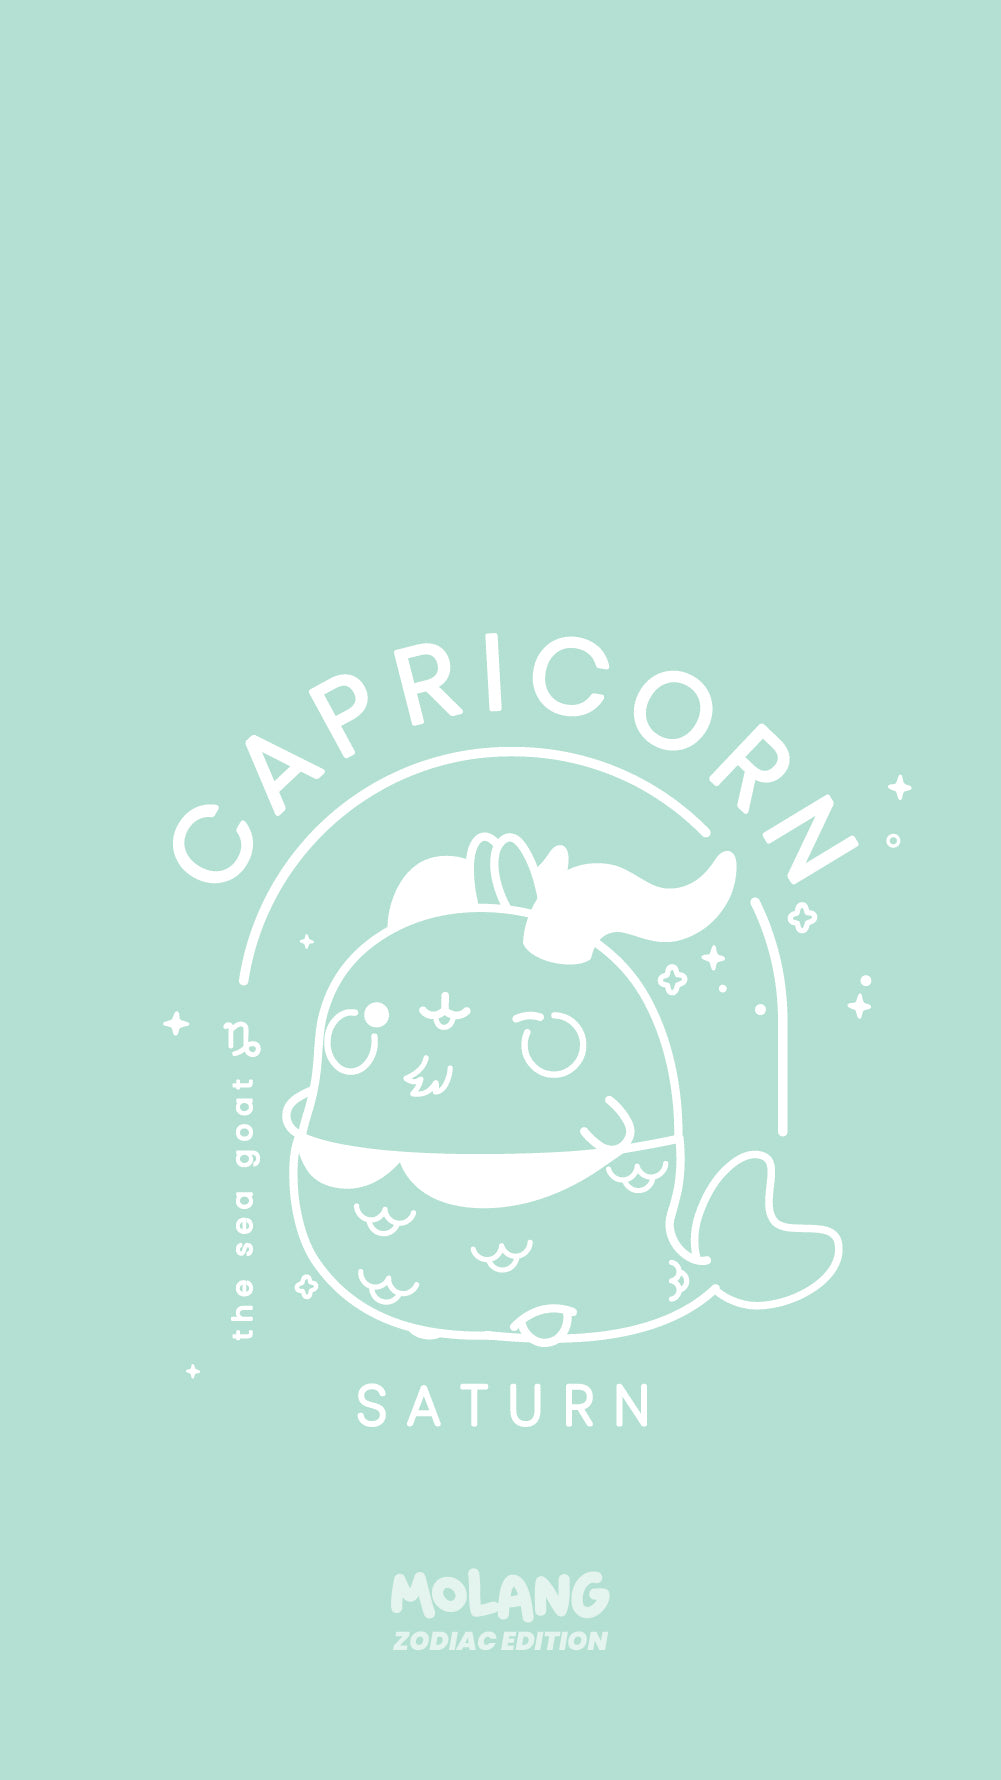 Capricorn wallpaper wallpaper by cshanno2422  Download on ZEDGE  c398